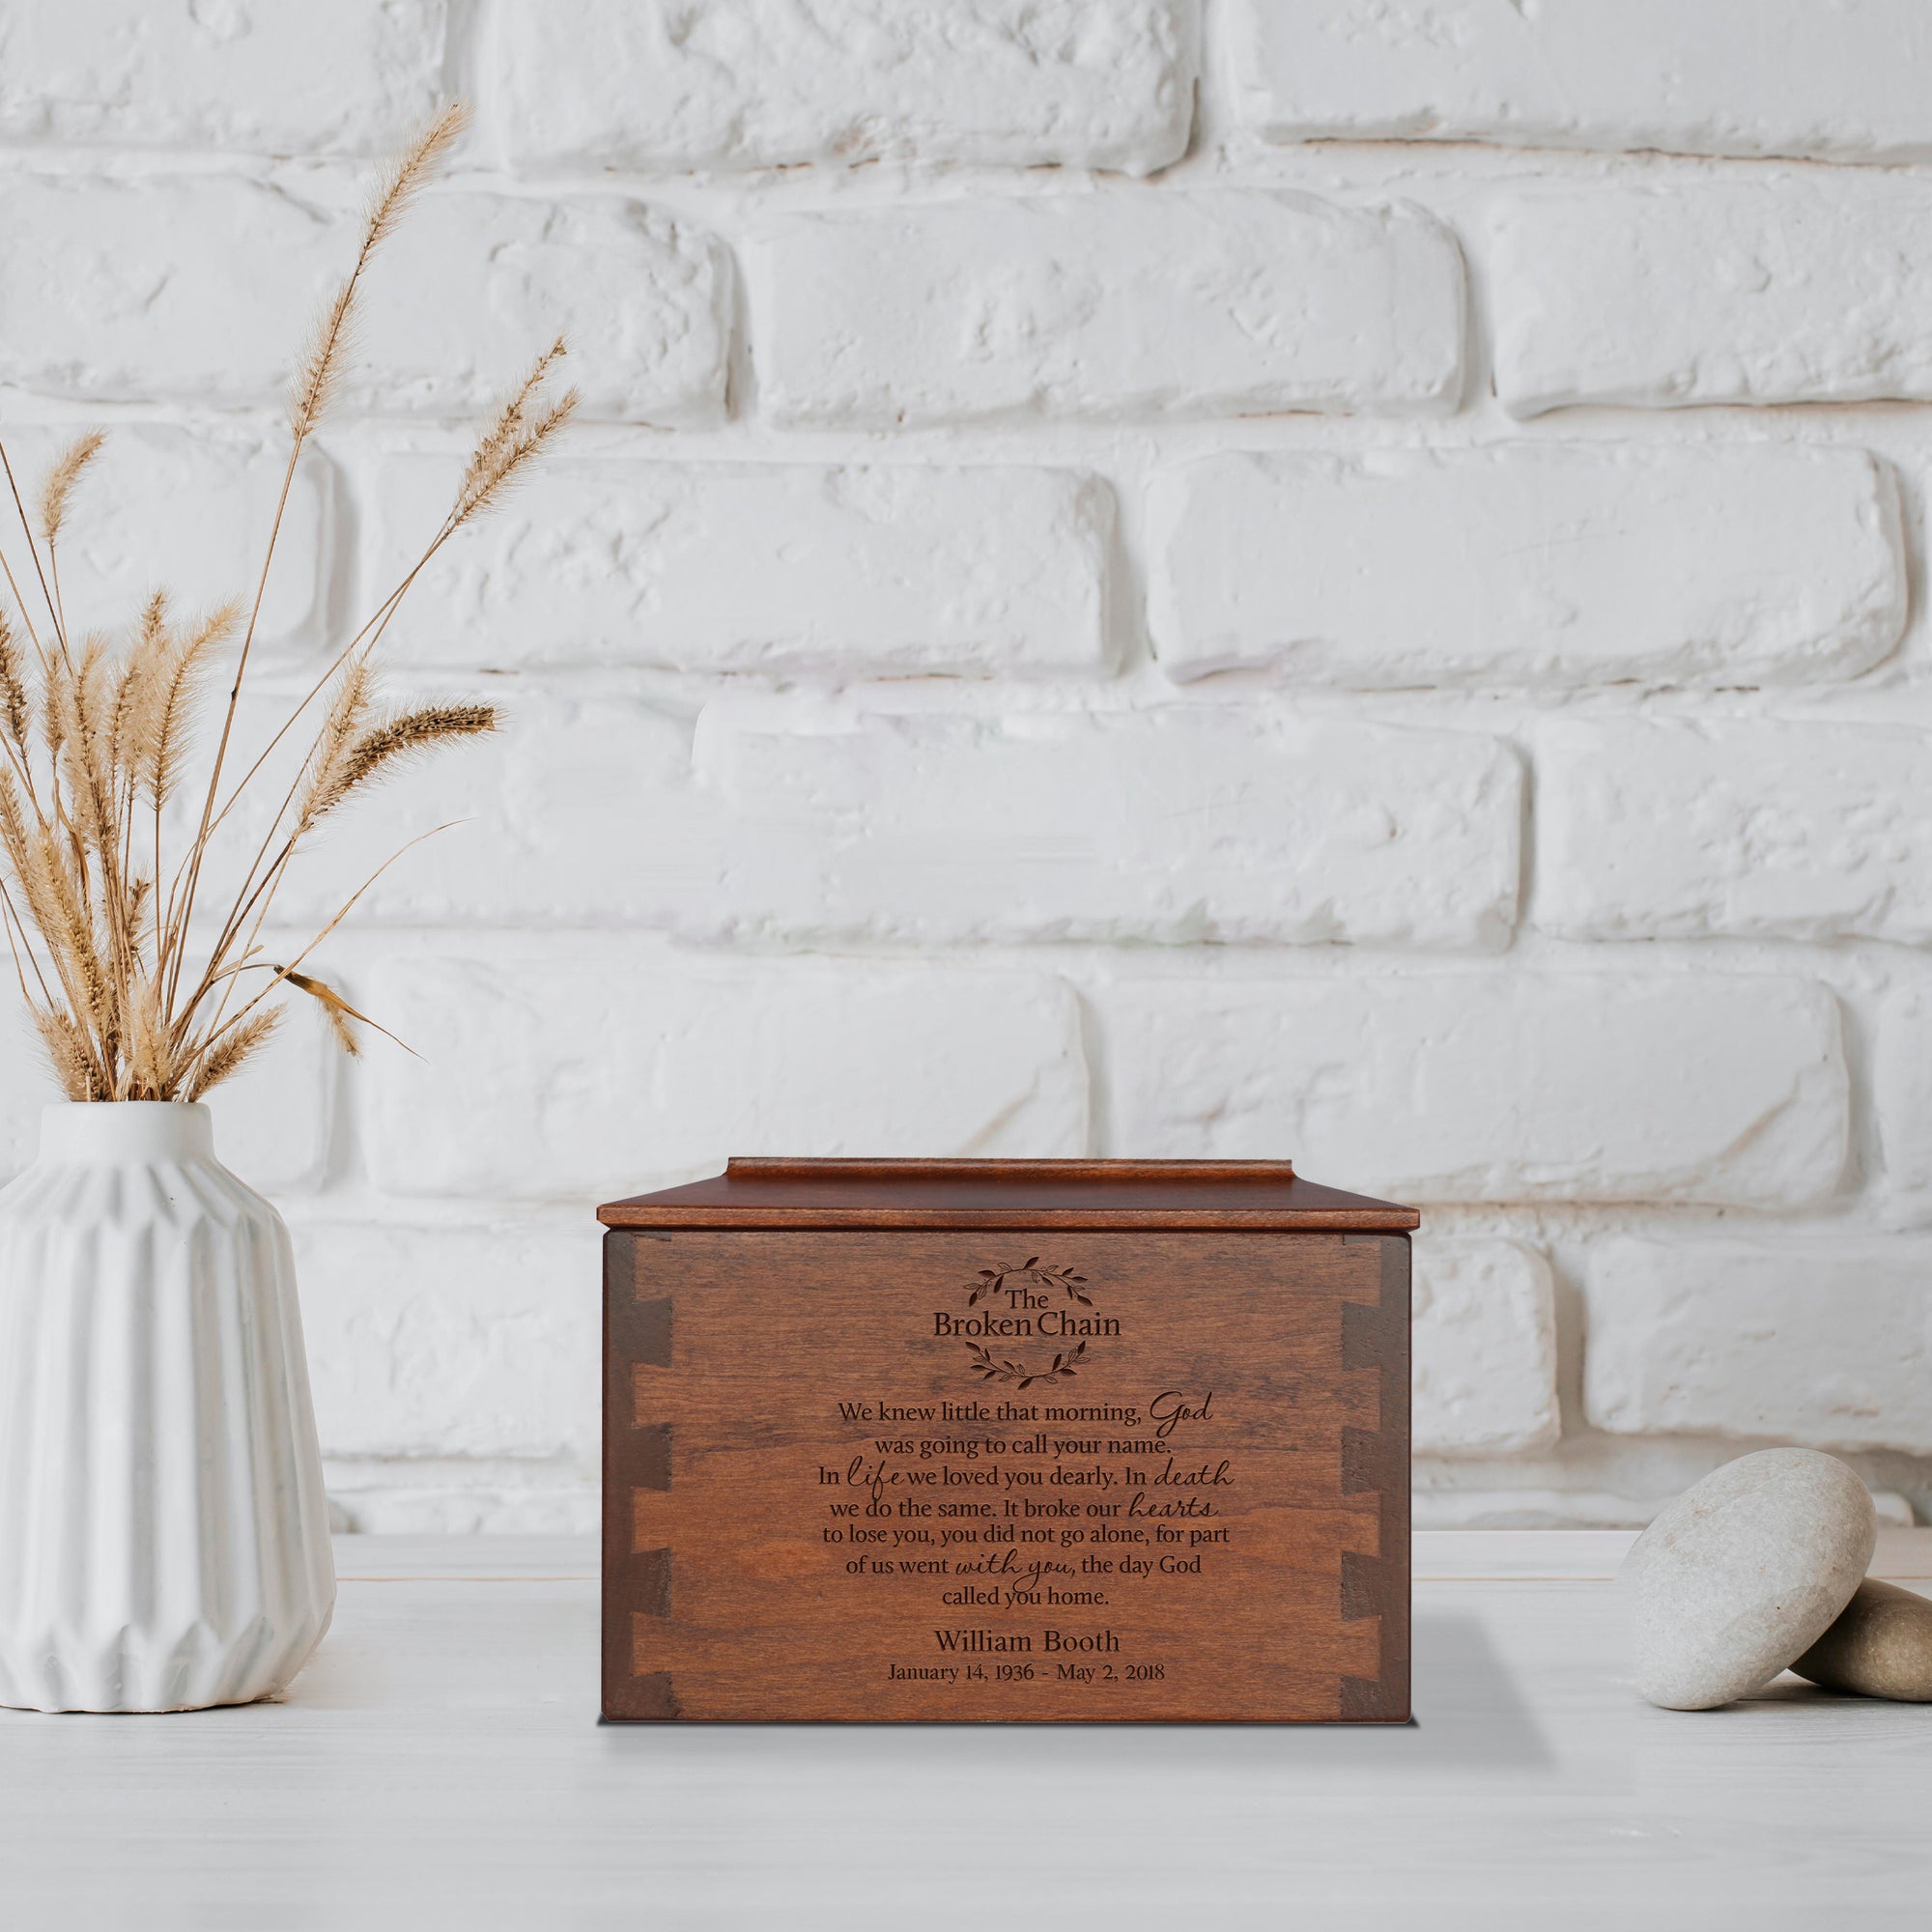 Custom Wooden Cremation Urn Box Small for Human Ashes holds 68 cu in The Broken Chain